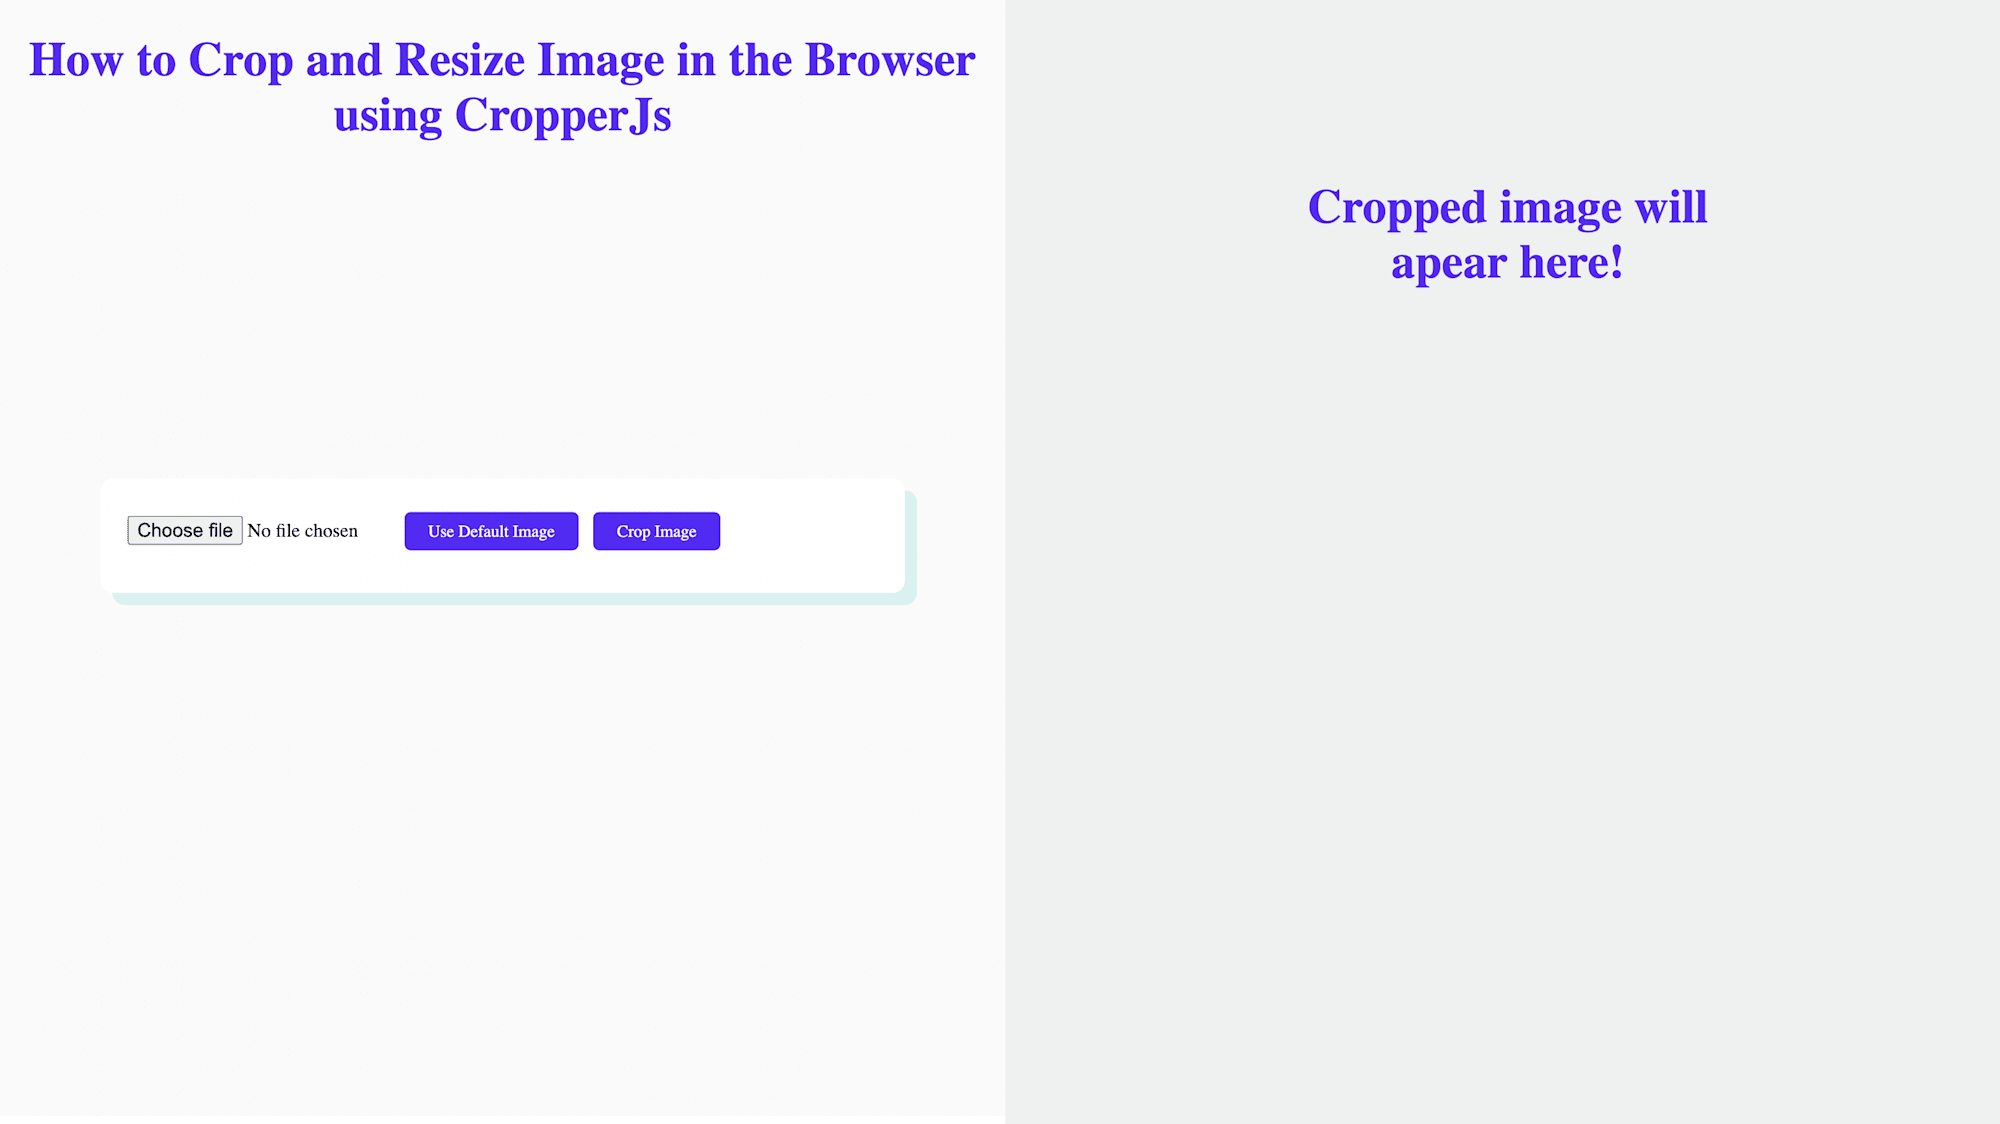 How to Crop and Resize Image in the Browser